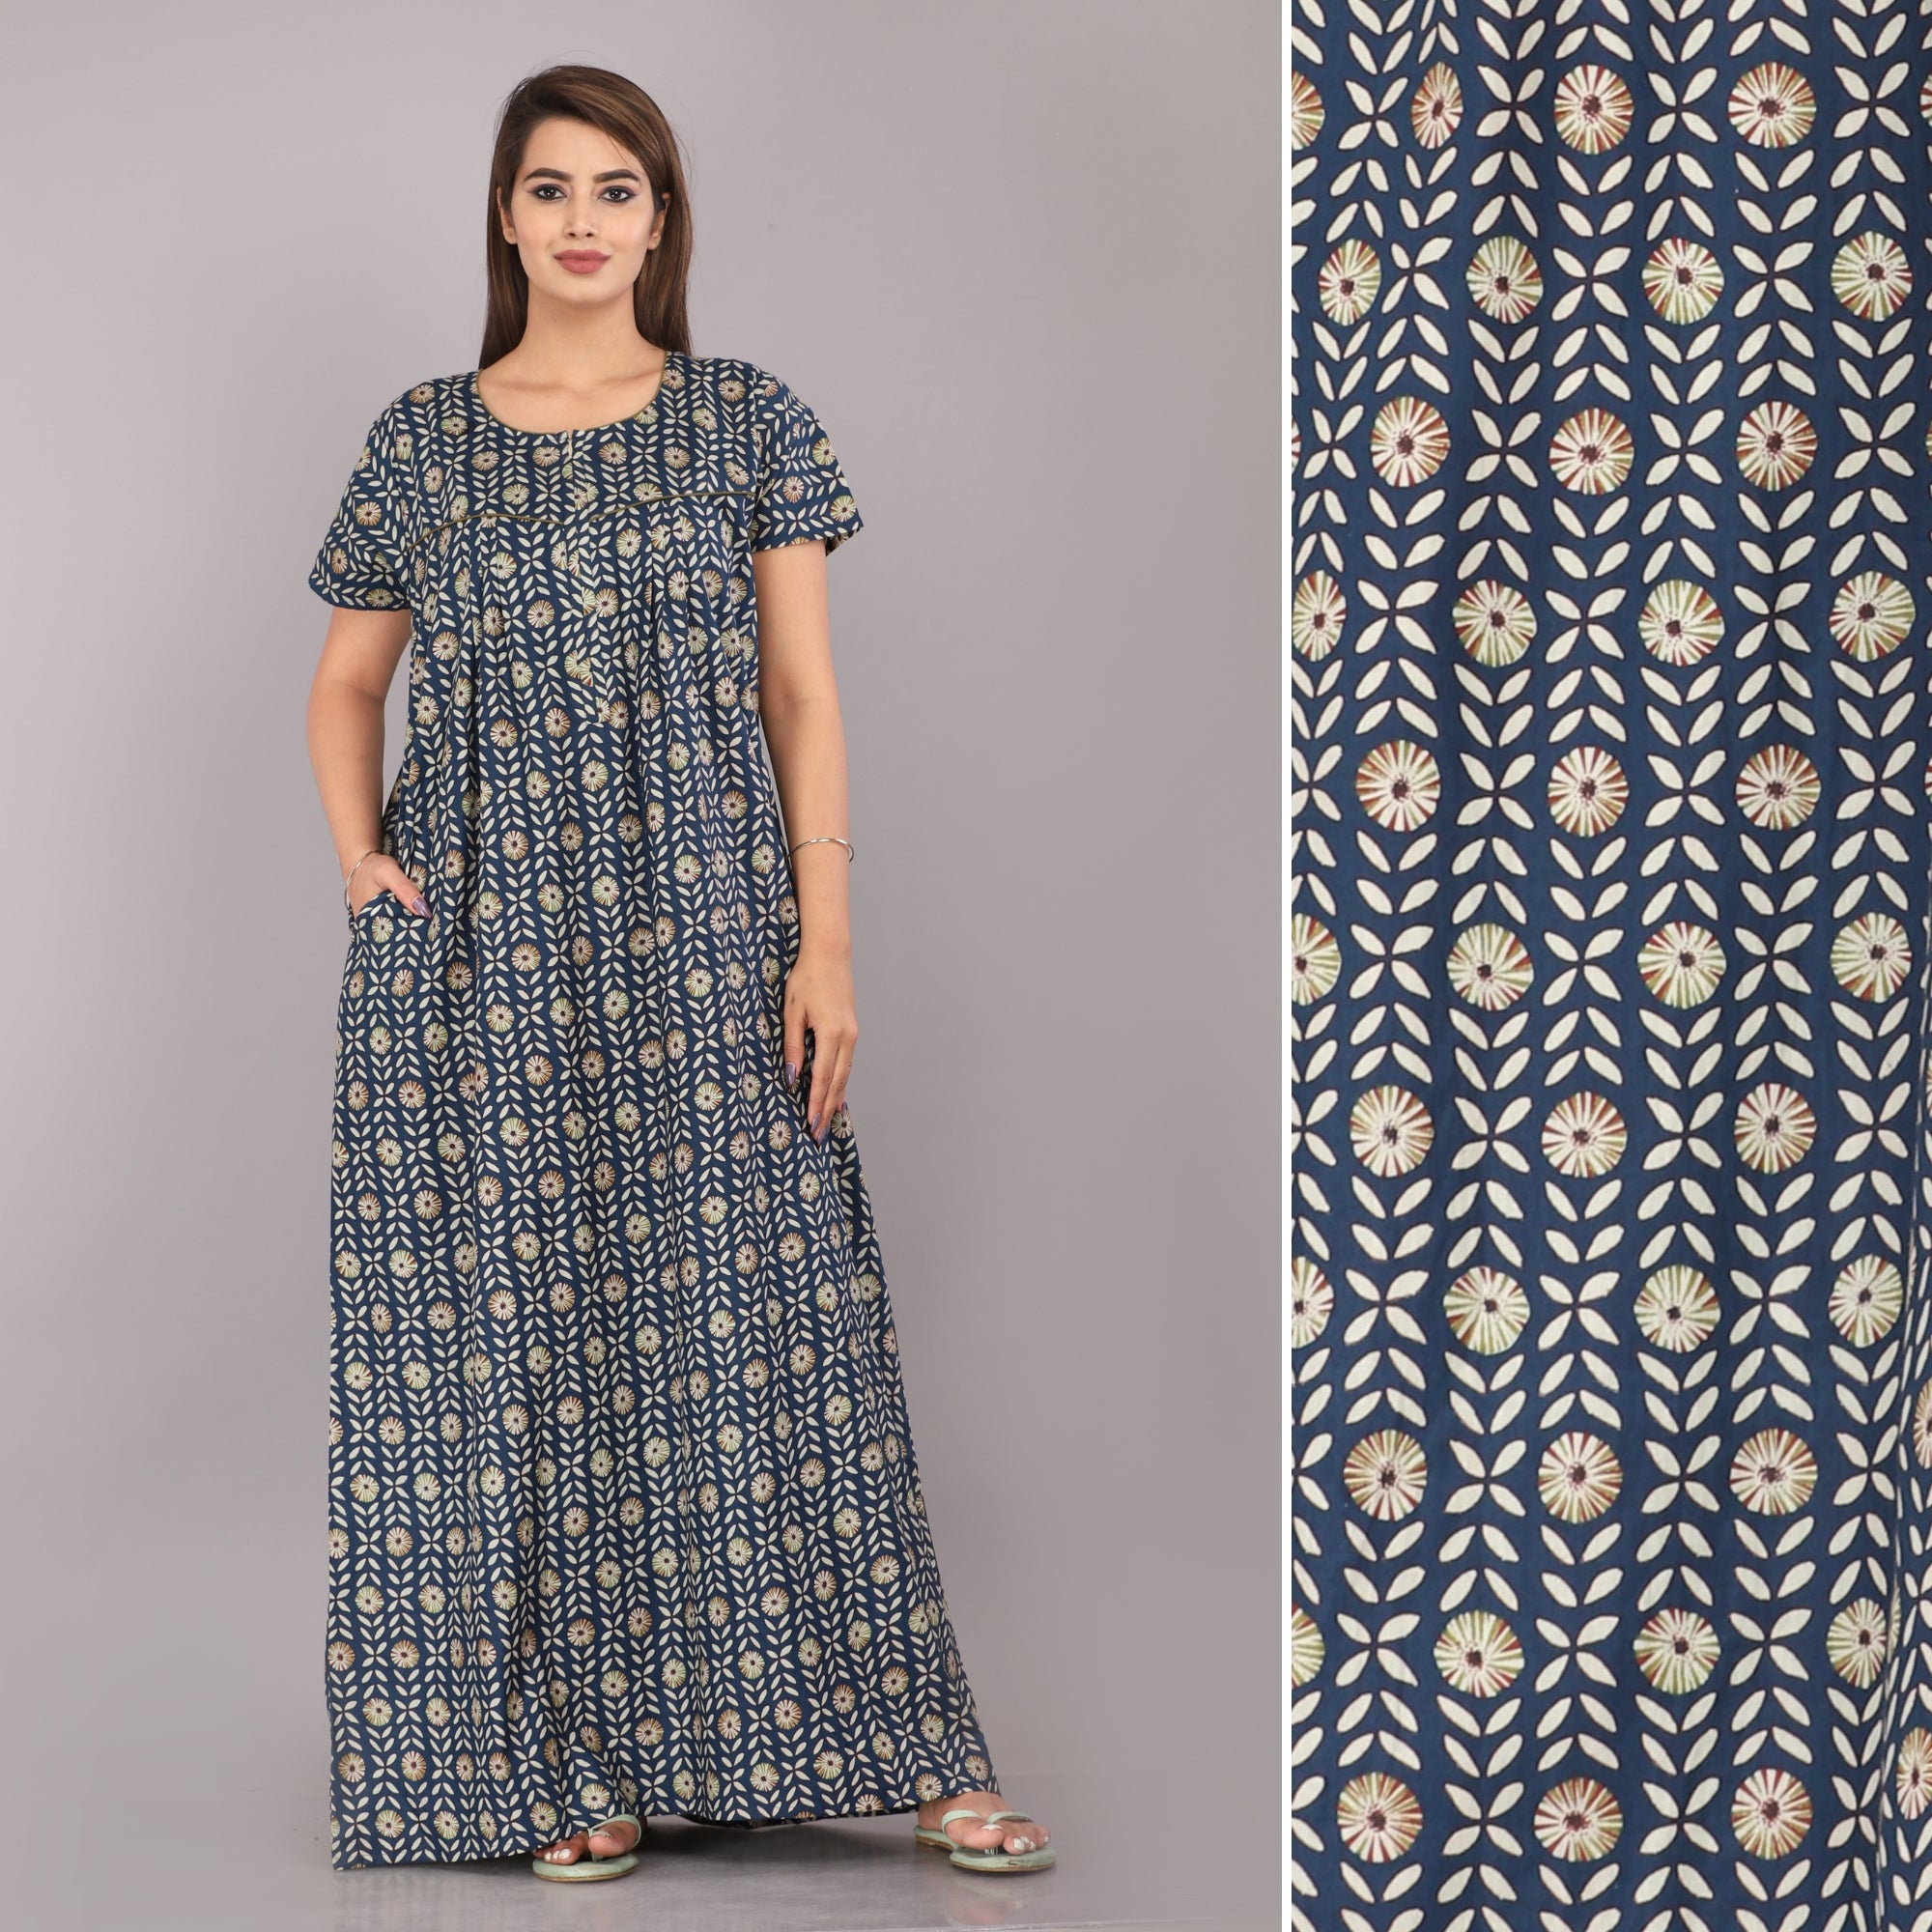 Jaipuri Cotton Maxi Dresses For Cooking and sexy maxi Dress